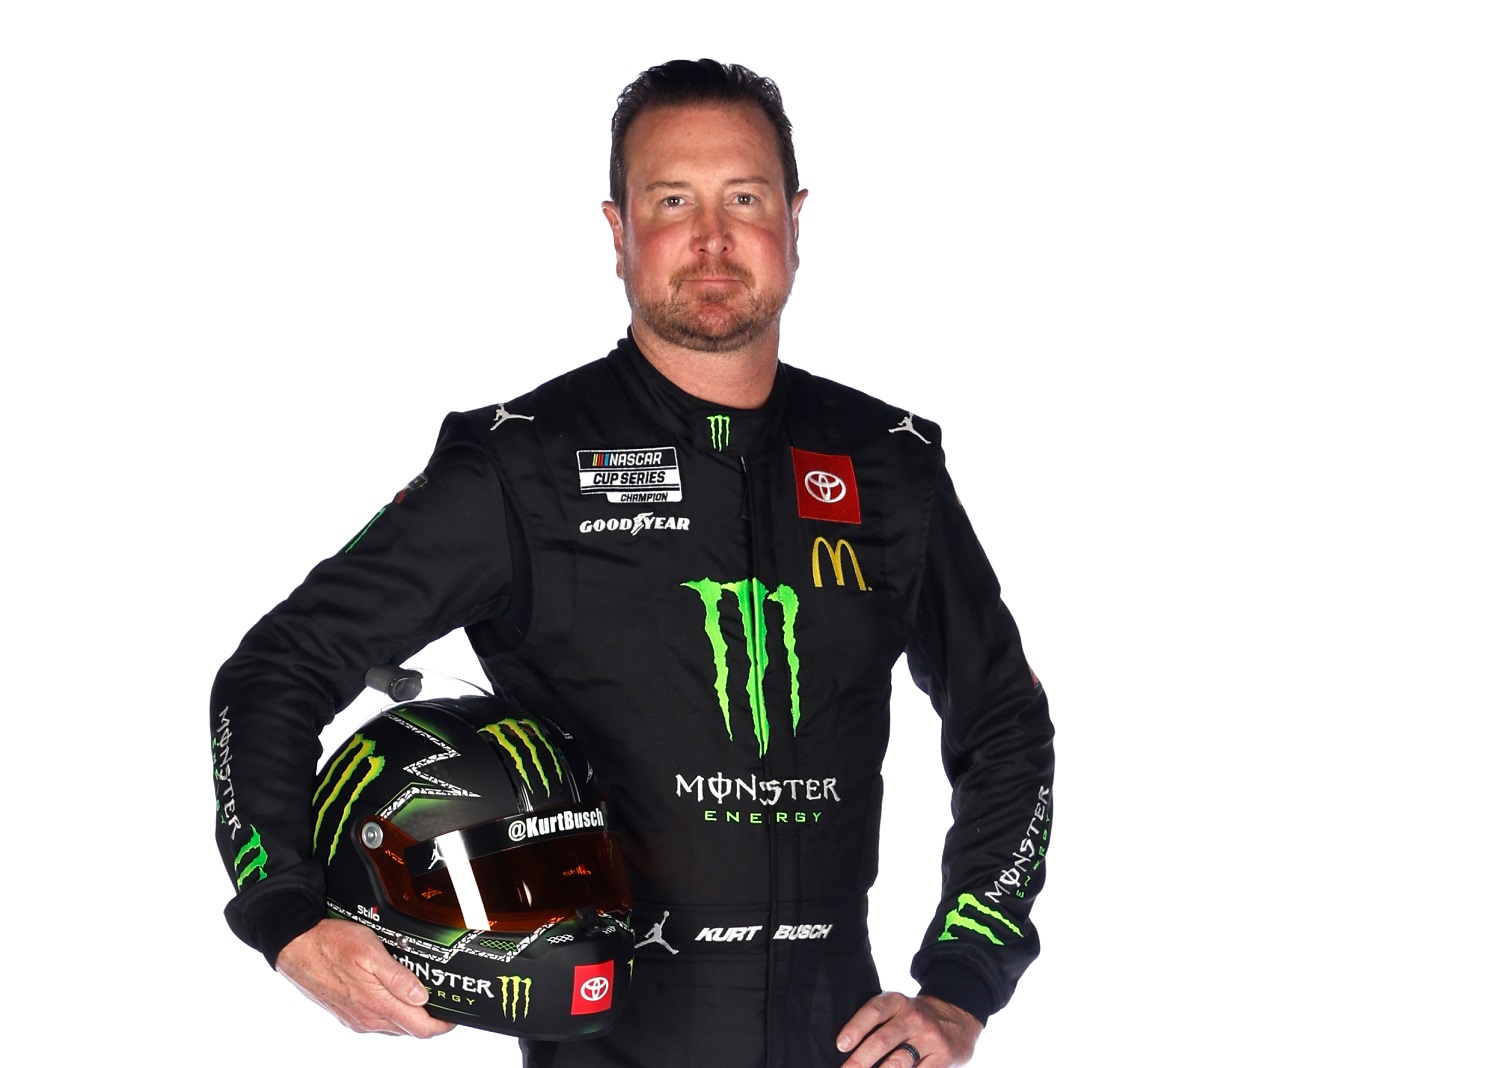 Kurt Busch poses for a photo during NASCAR Production Days at Clutch Studios on Jan. 19, 2022, in Concord, North Carolina. | Chris Graythen/Getty Images